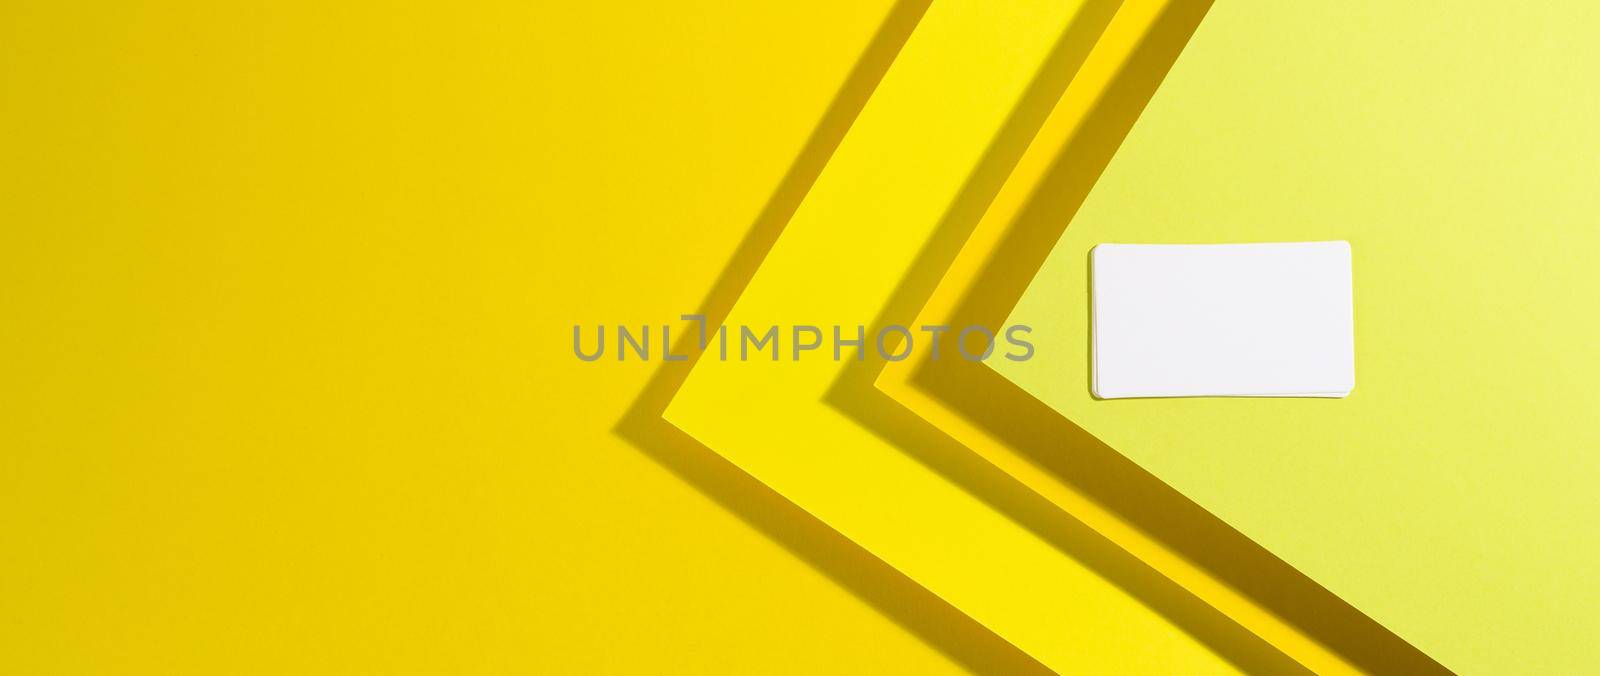 blank white rectangular business card on creative yellow background from sheets of paper with shadow, top view by ndanko